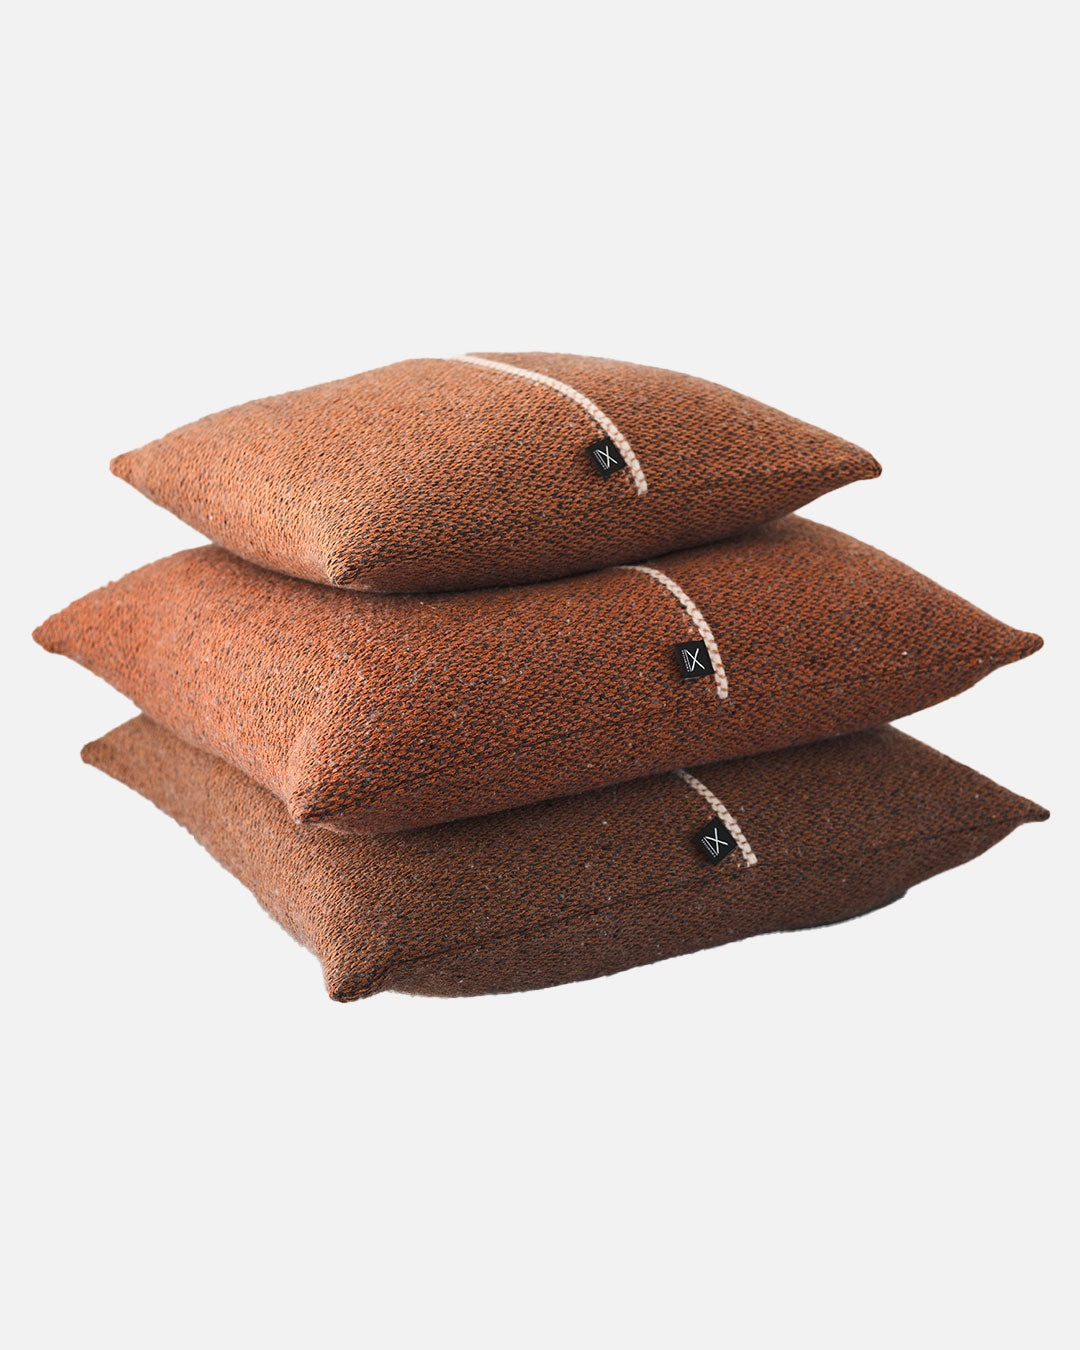 Urano Cushion Cover in Burnt Umber